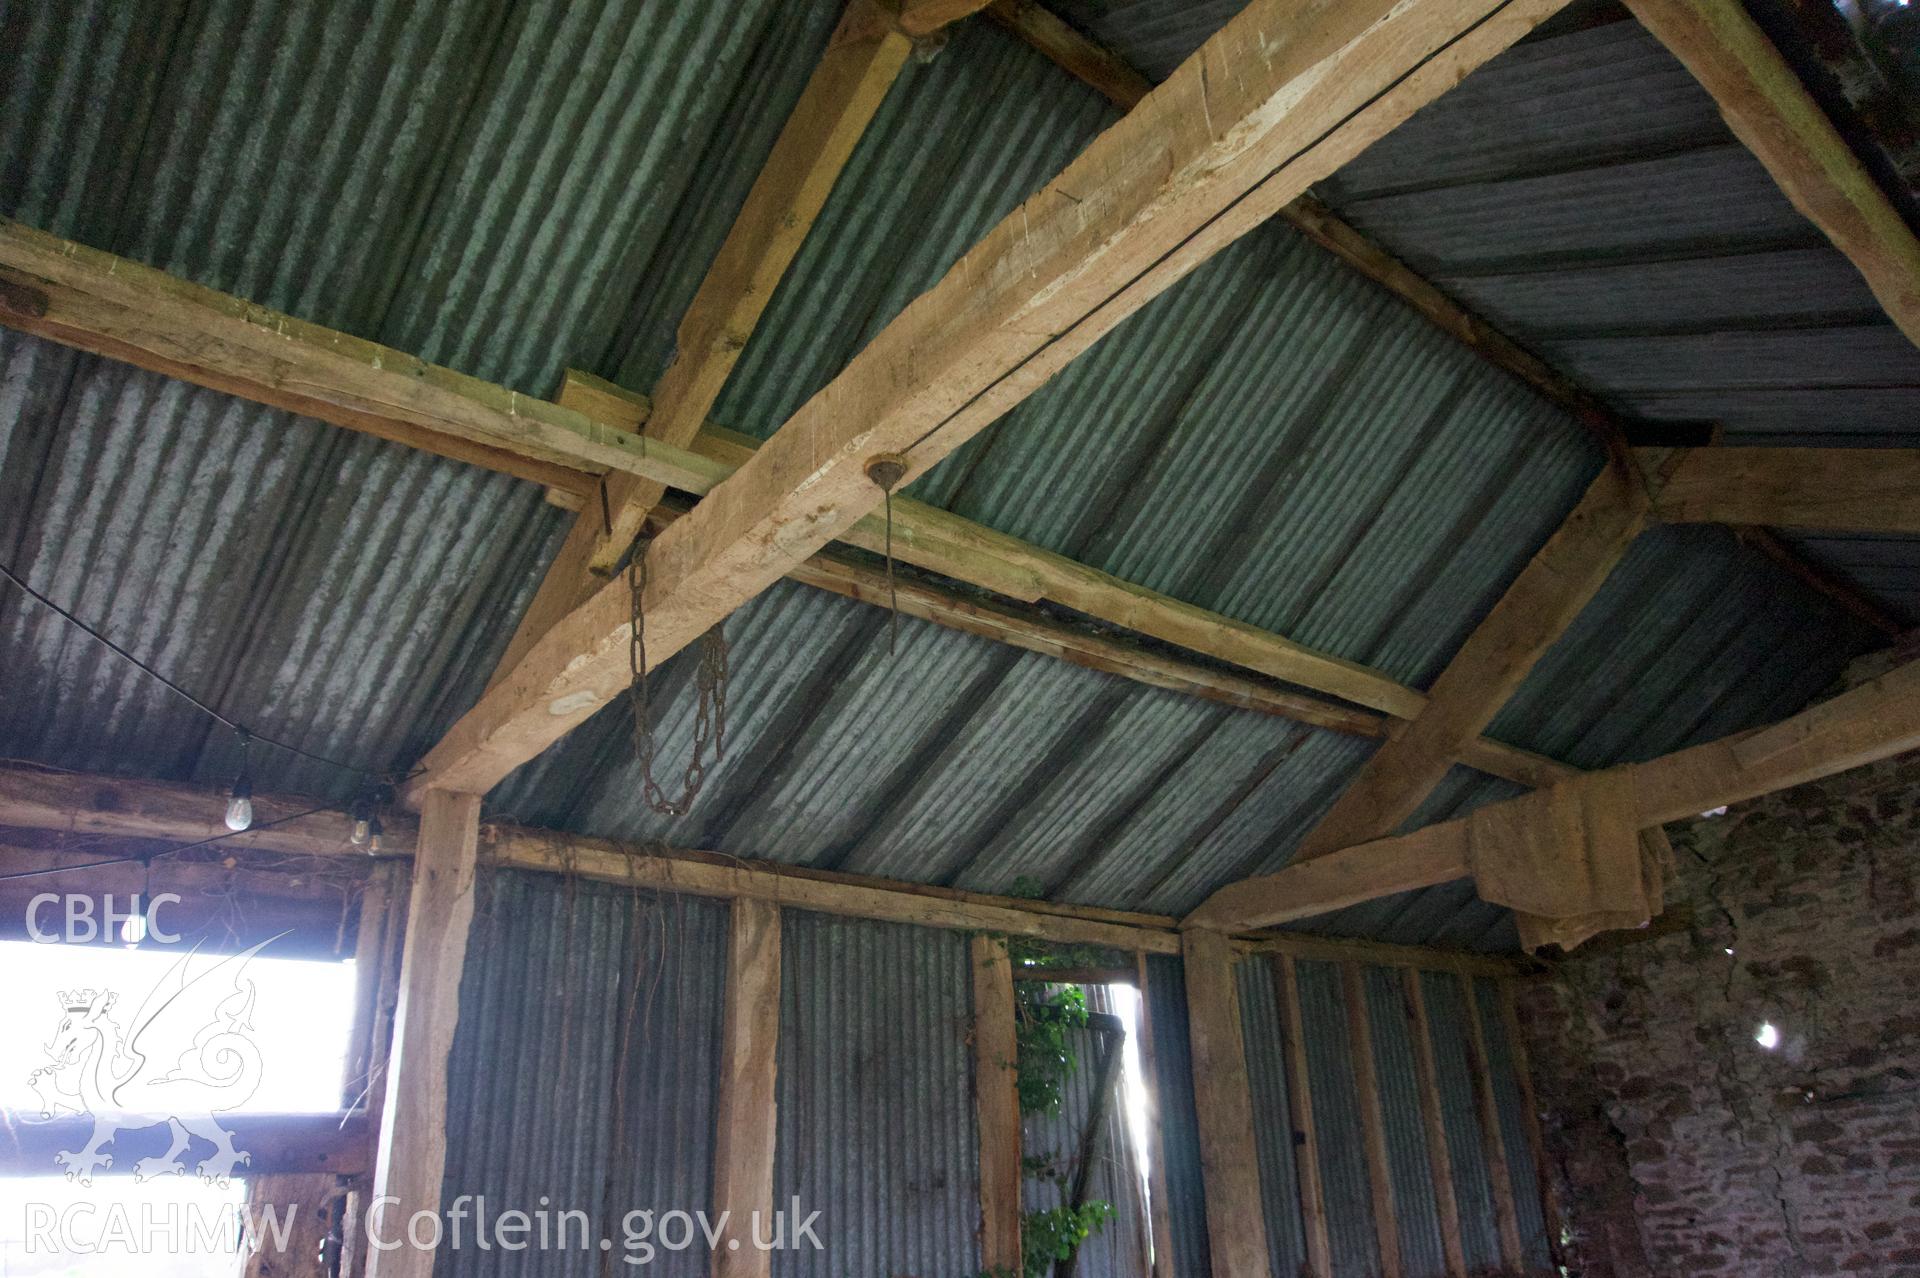 Underside of roof at Middle Ton Threshing Barn. Photographed for Historic Building Photographic Record of Middle Ton Threshing Barn, Llanvapley, by Dan Courtney of Cog Architects, 2019.